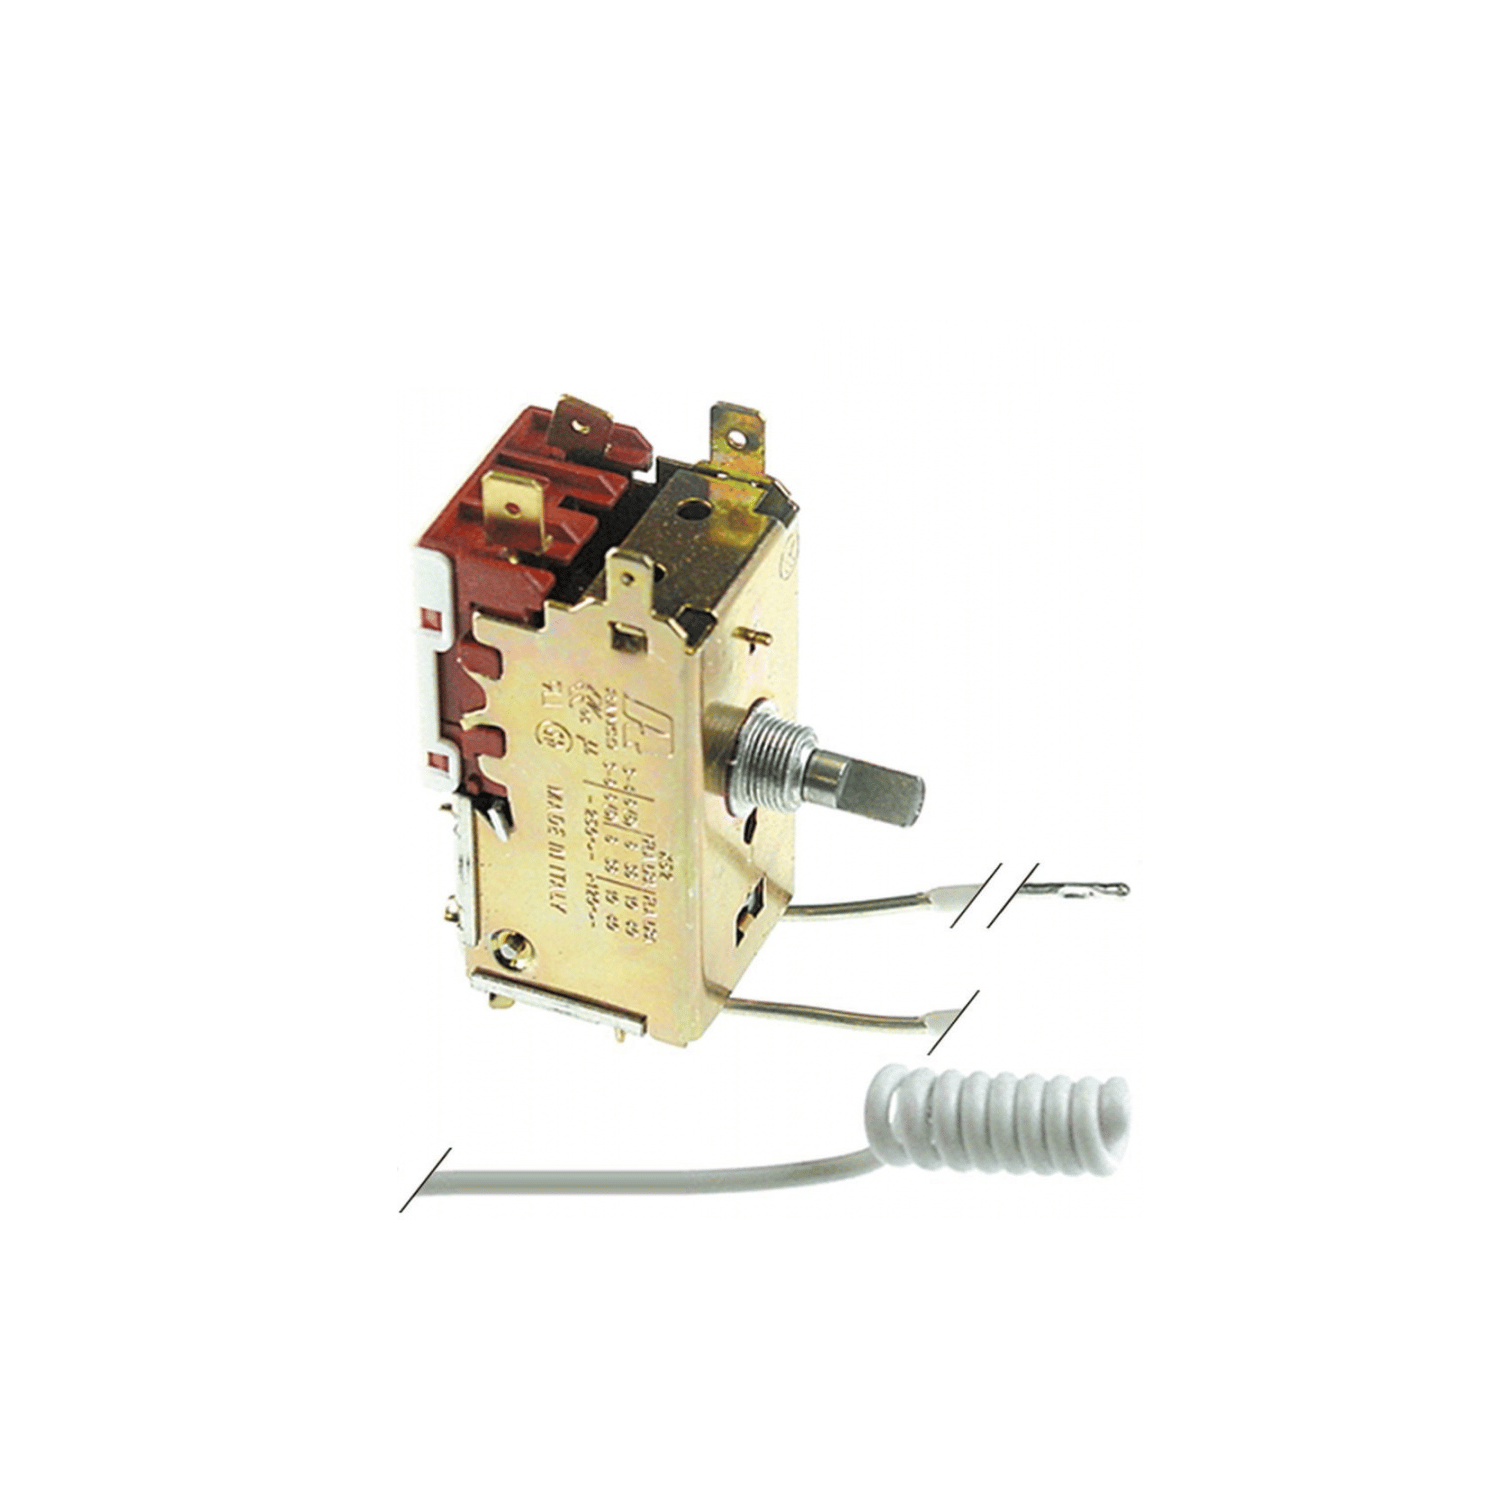 THERMOSTAT RANCO K52-L4512,2 contacts 6A 250V double tube capillaire 2100 mm / 1850 mm froid -6,4/-6°C, chaud +8,5/+8,8°C croissant ø 6x4,6 mm